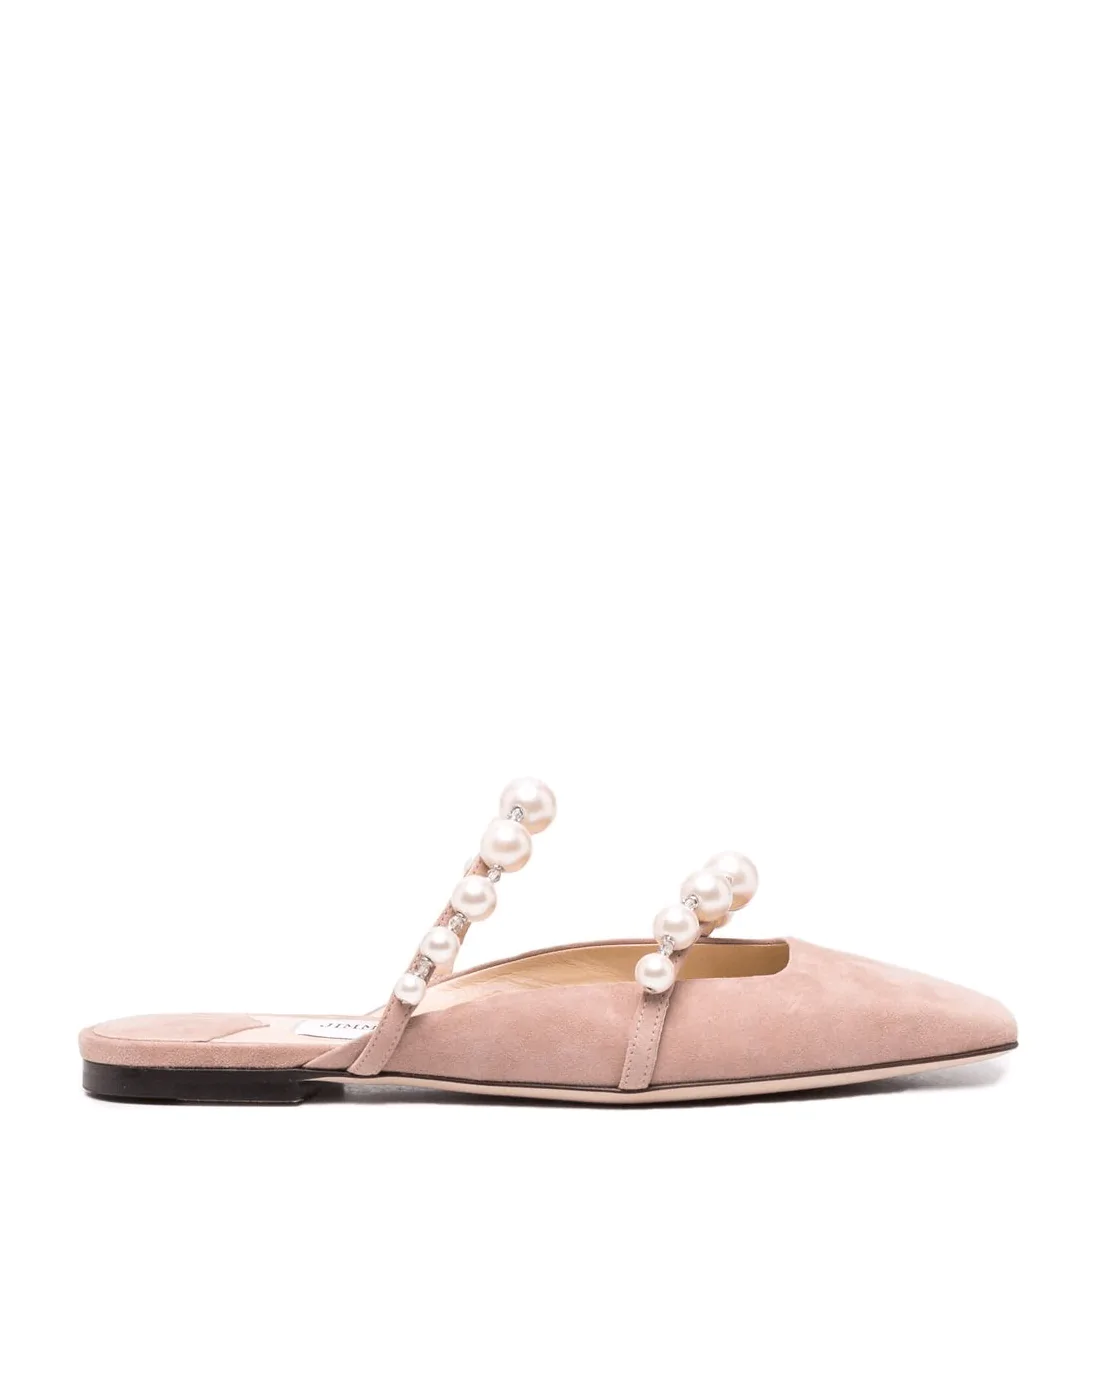 Jimmy Choo AMAYA Flats Ballet Pink Suede Flats With Pearl Embellishment